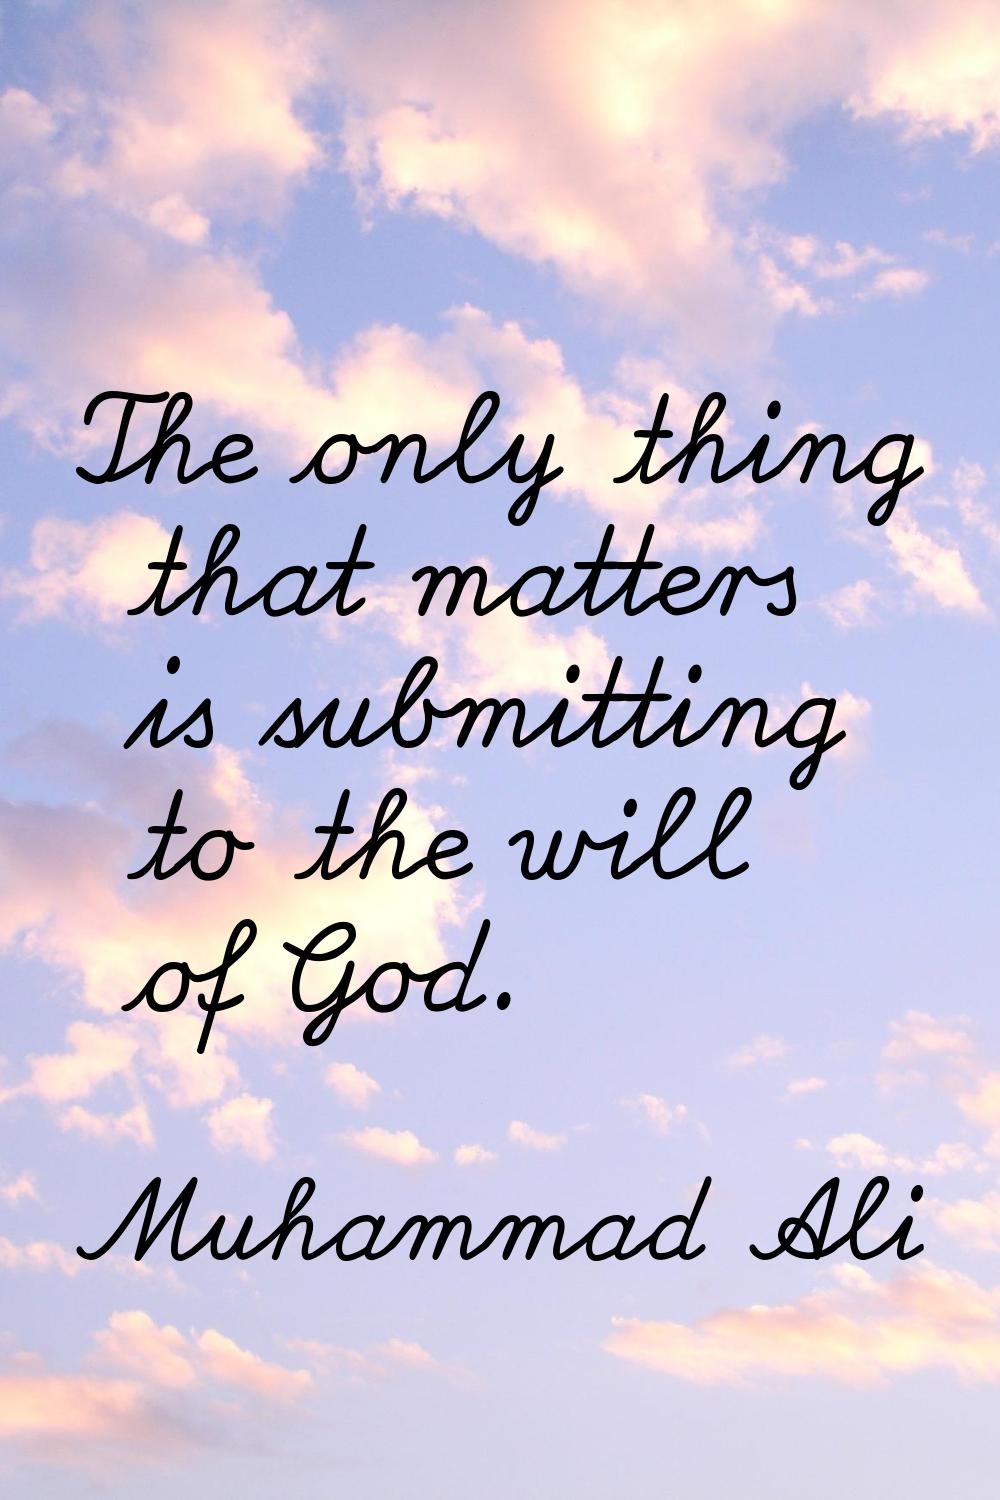 The only thing that matters is submitting to the will of God.